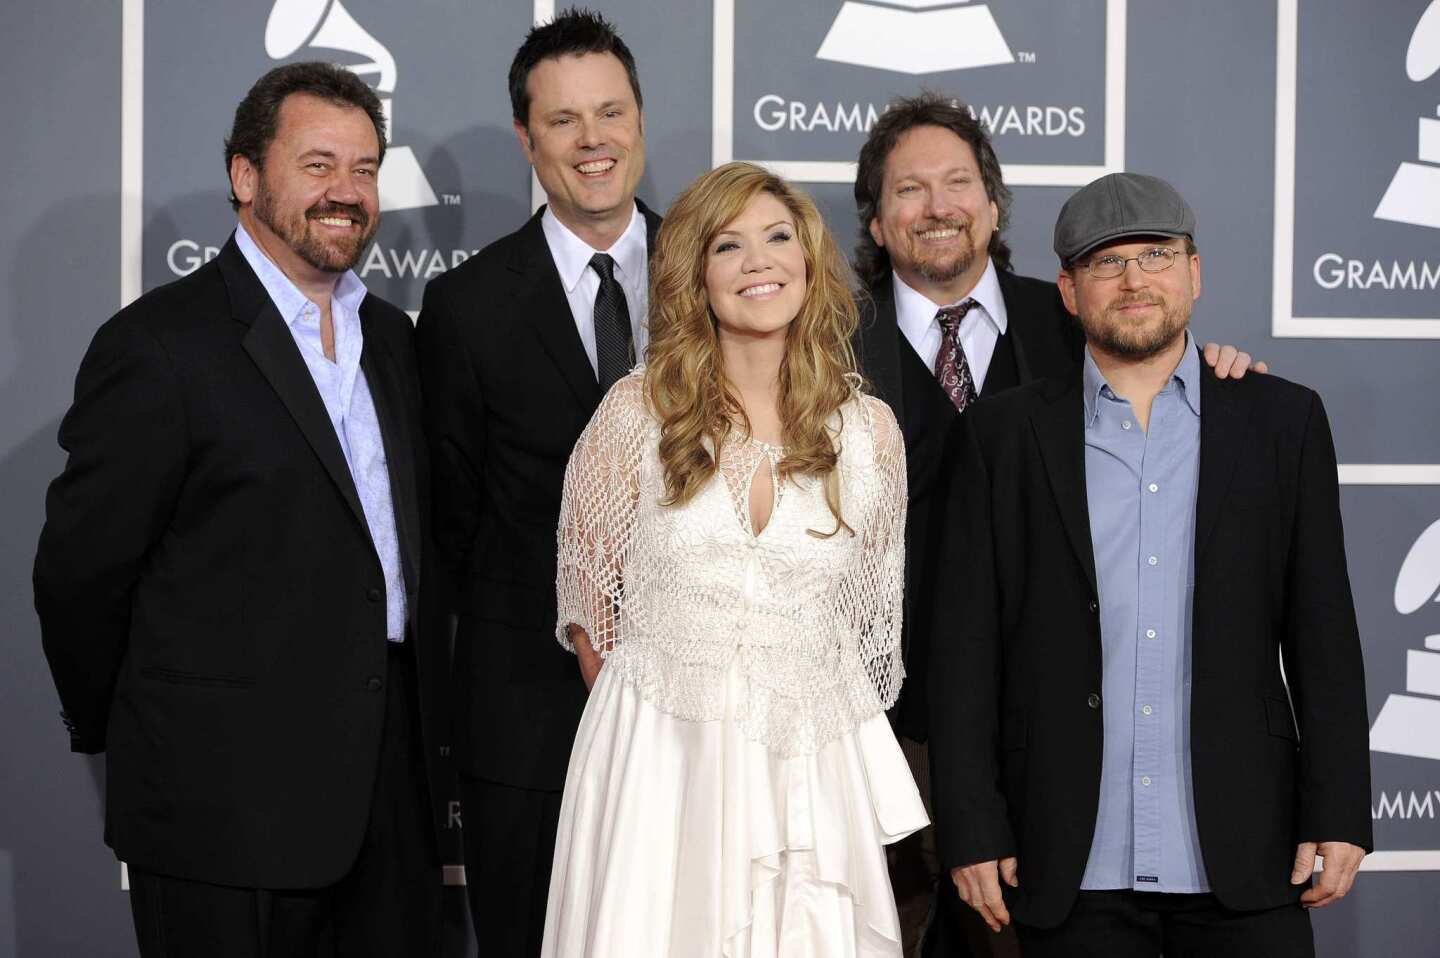 Multiple-award nominee Alison Krauss, center, and the band Union Station, up for bluegrass album for "Paper Airplane."